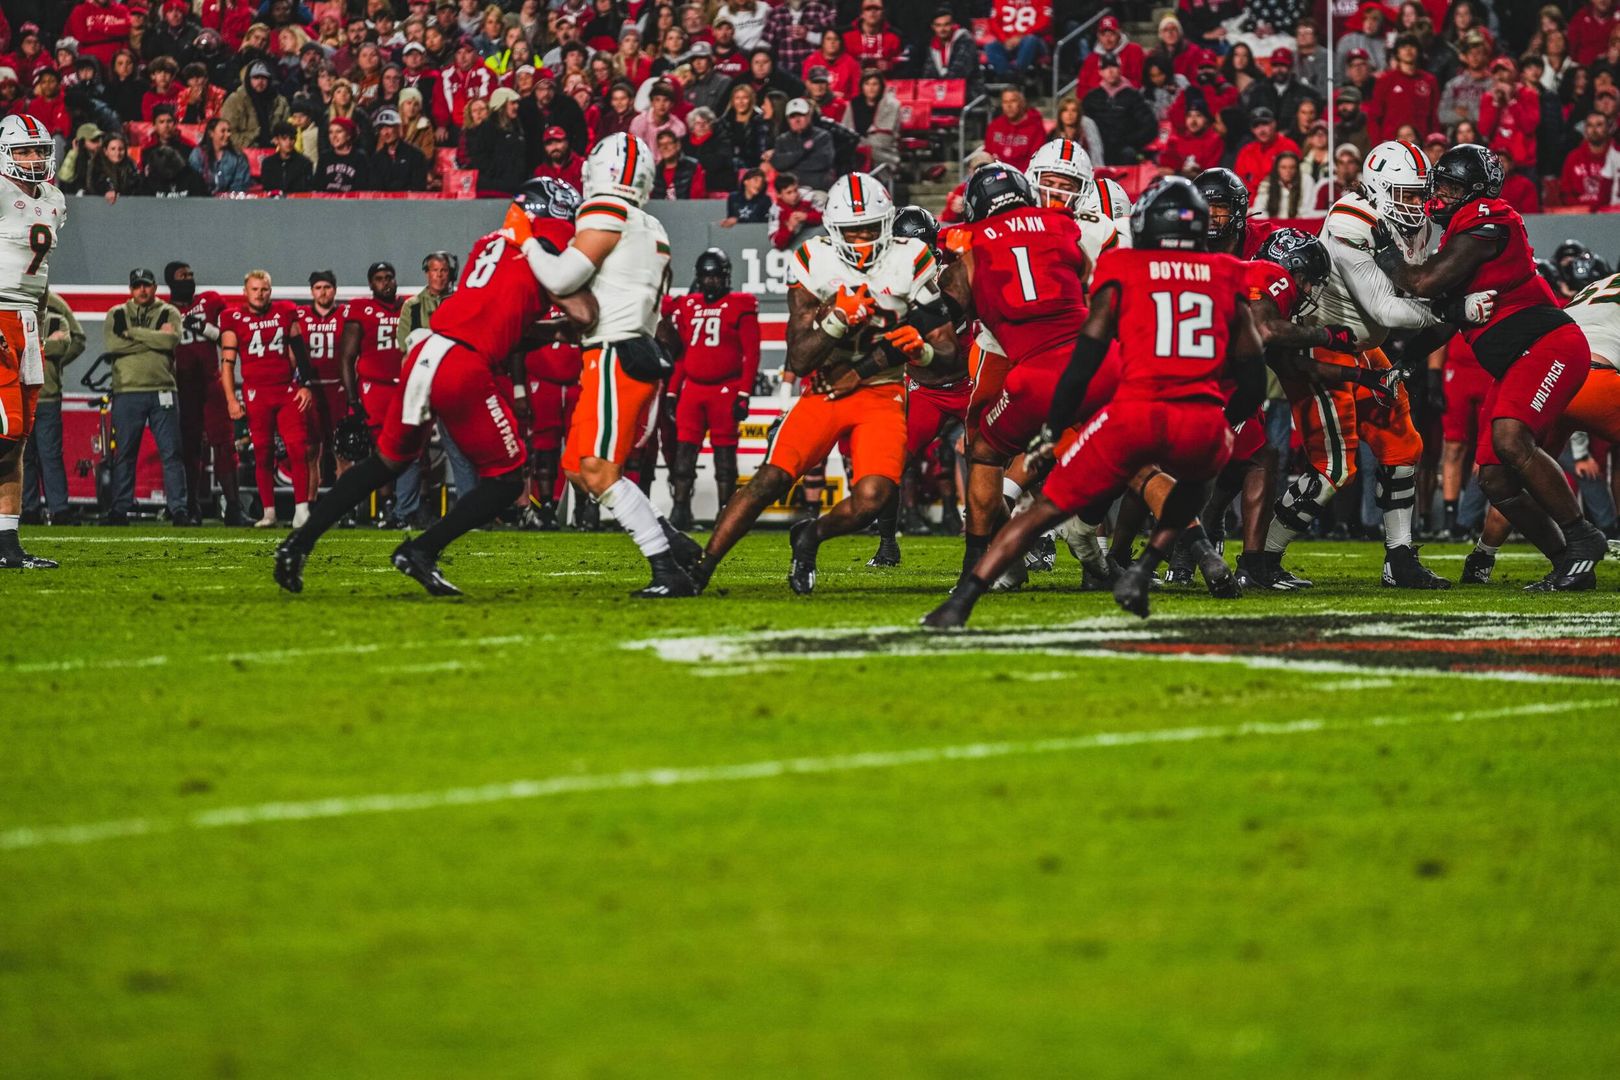 Canes Rewind: A Look Back at the Game Against NC State